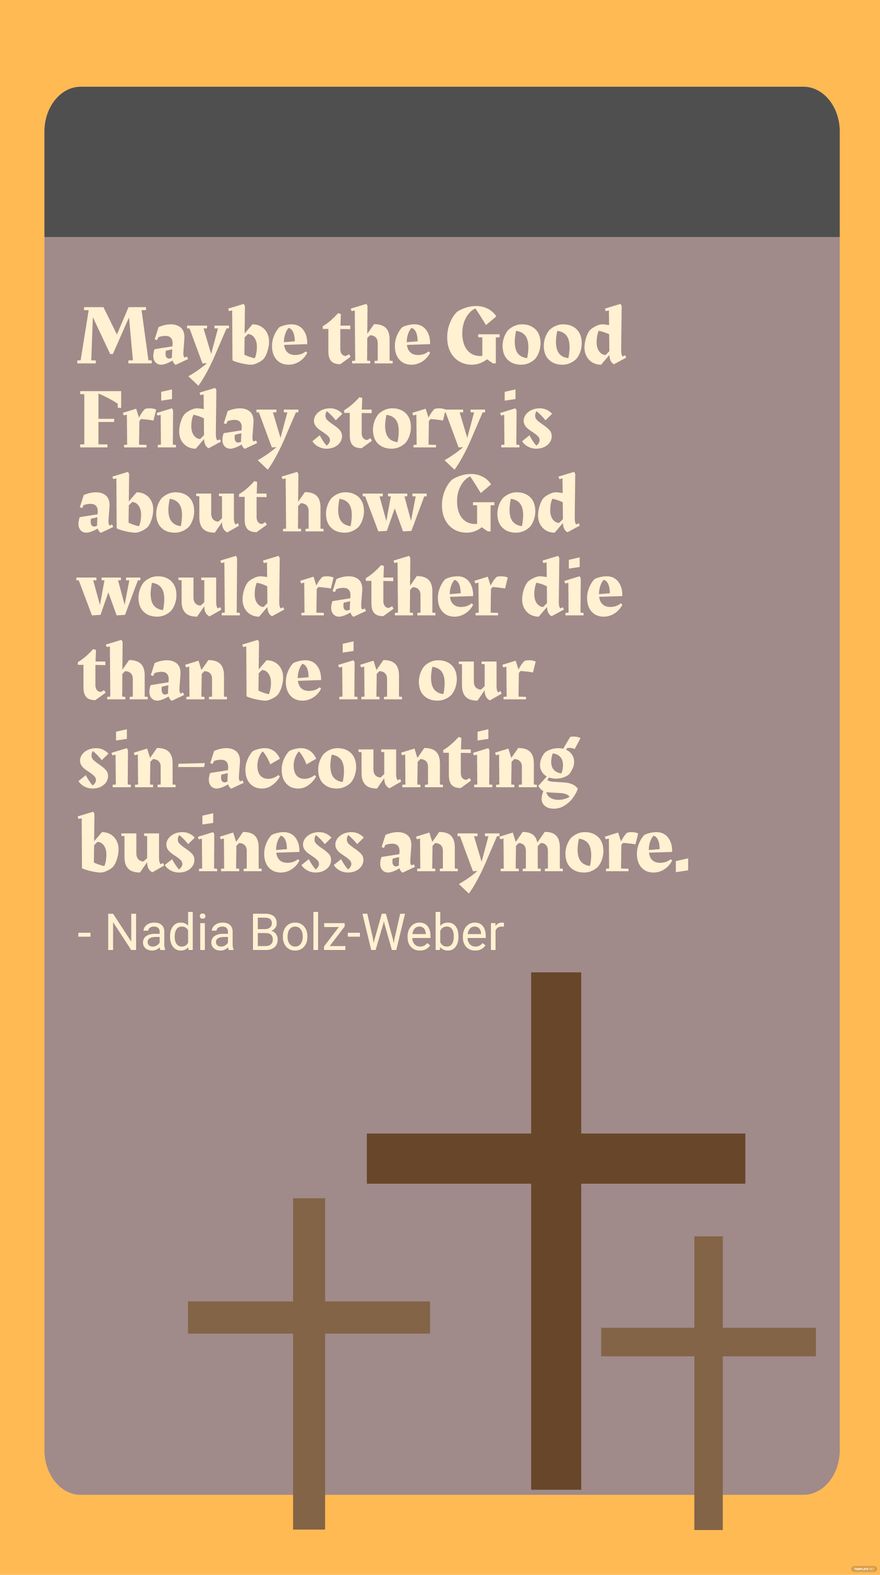 Free Nadia Bolz-Weber - Maybe the Good Friday story is about how God would rather die than be in our sin-accounting business anymore. in JPG